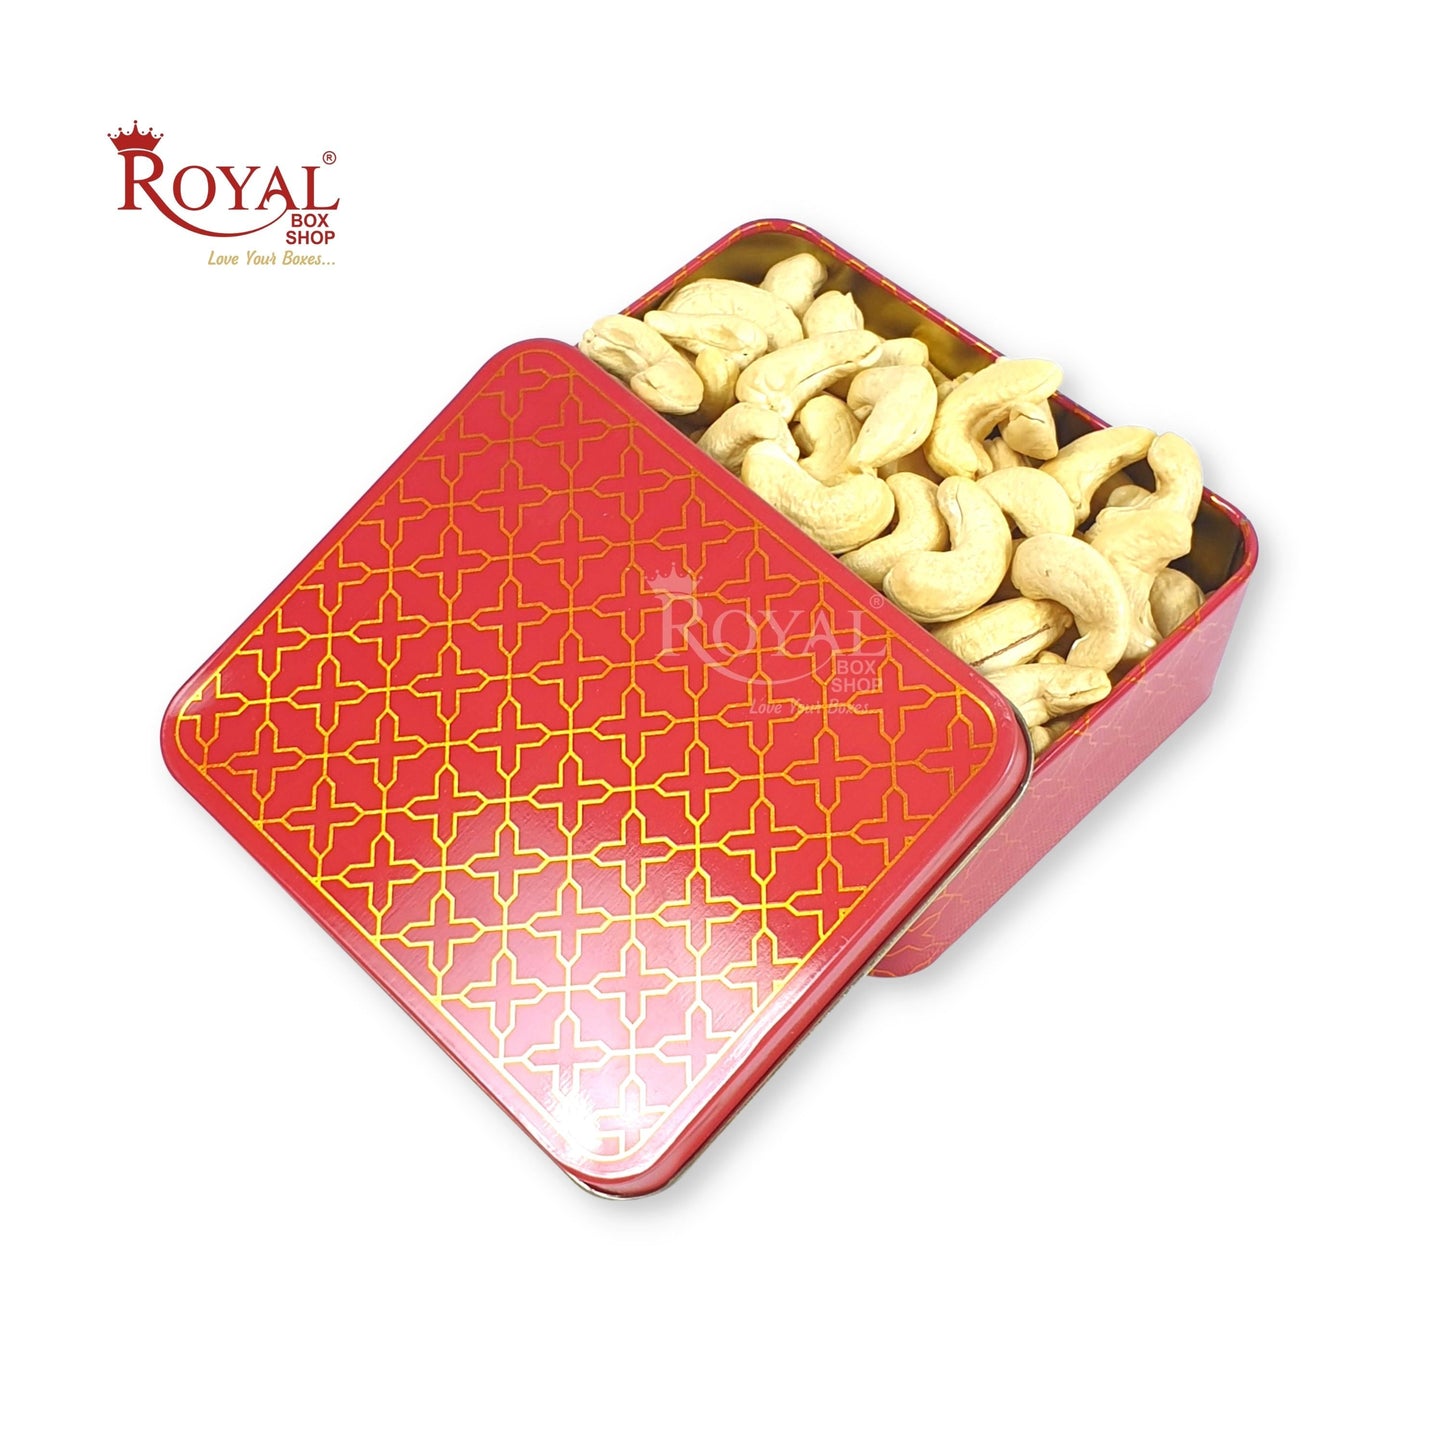 Premium Tin Box I Golden Foiling I 4"x4.75"x1" Inches I Red Color I For Return Gifts, Hamper Box, Dry Fruits Packing